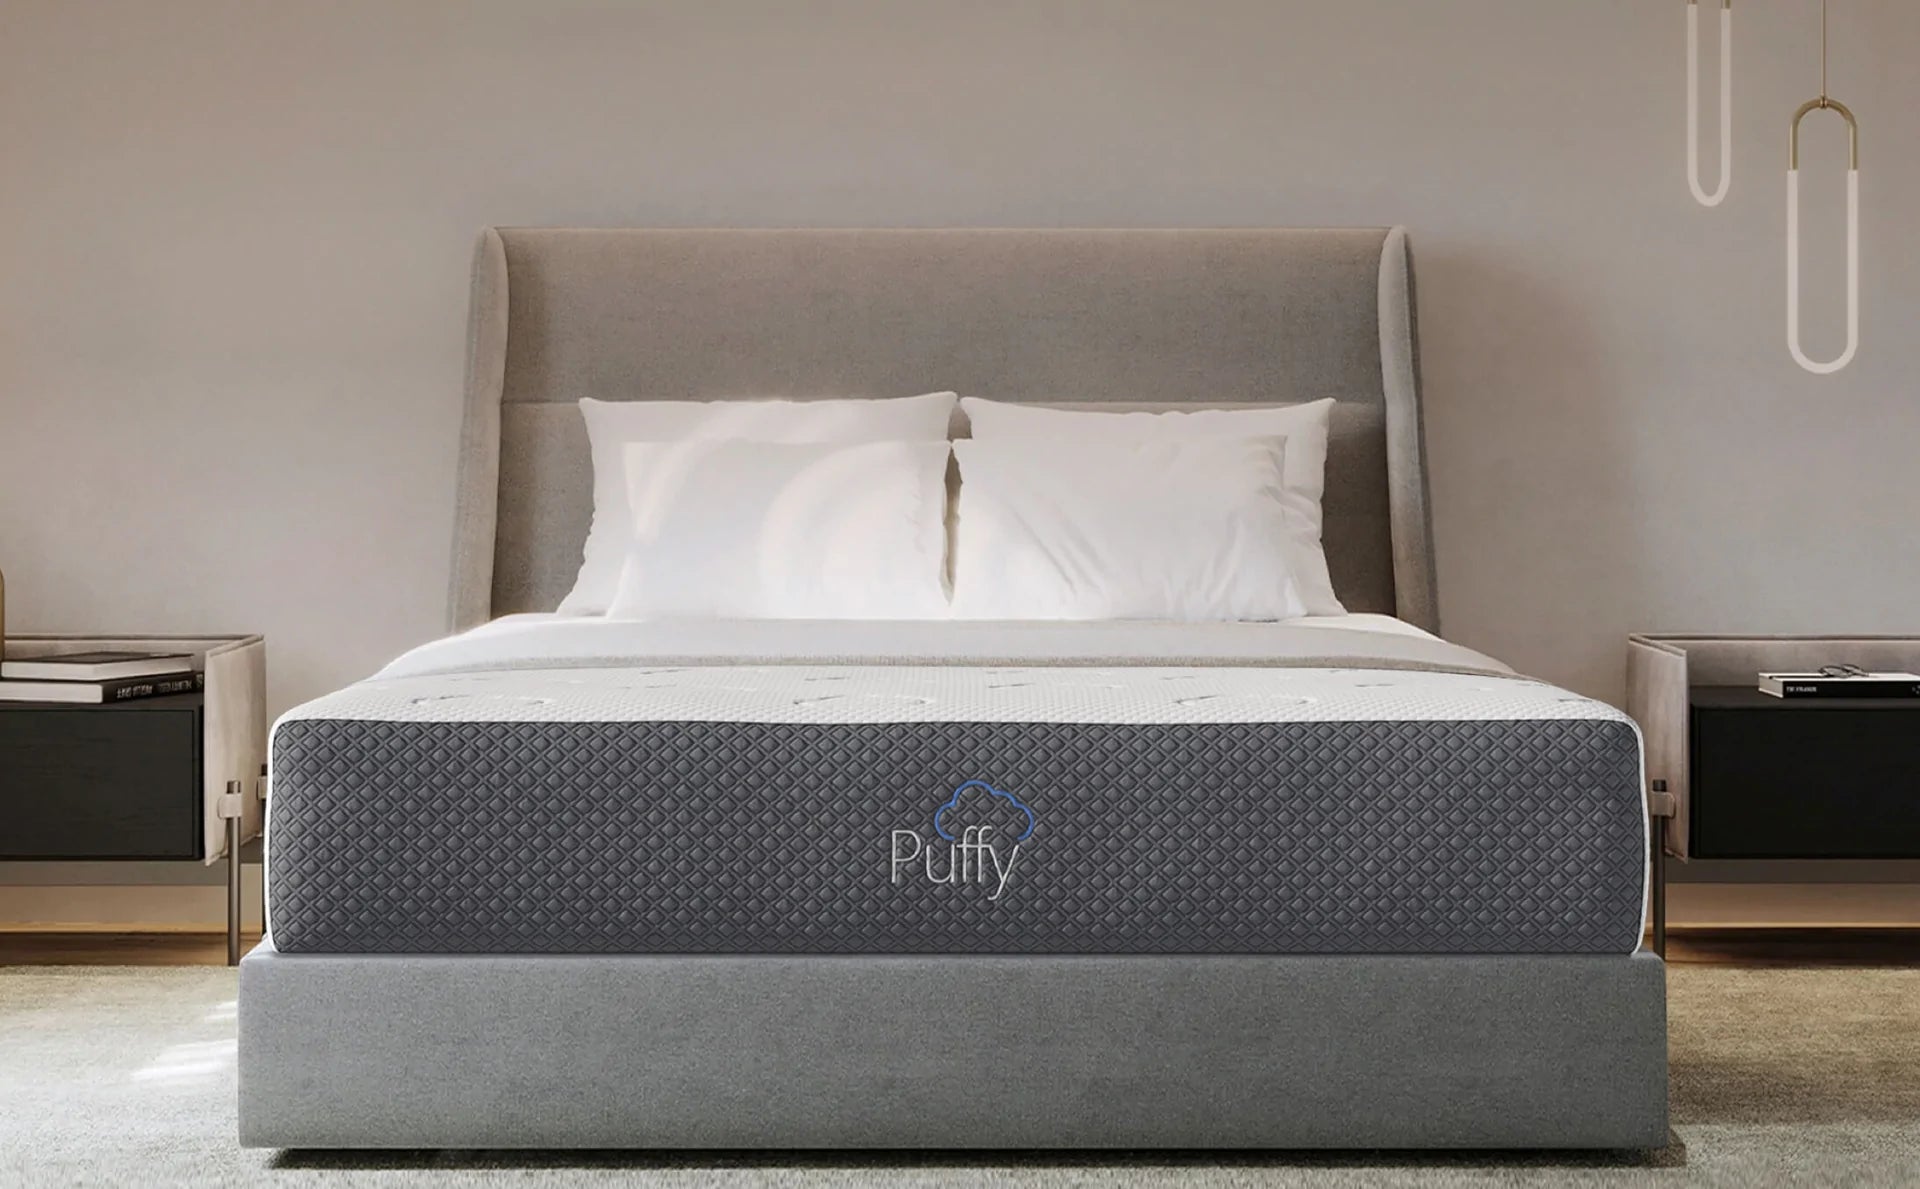 Where Can I Try A Puffy Mattress